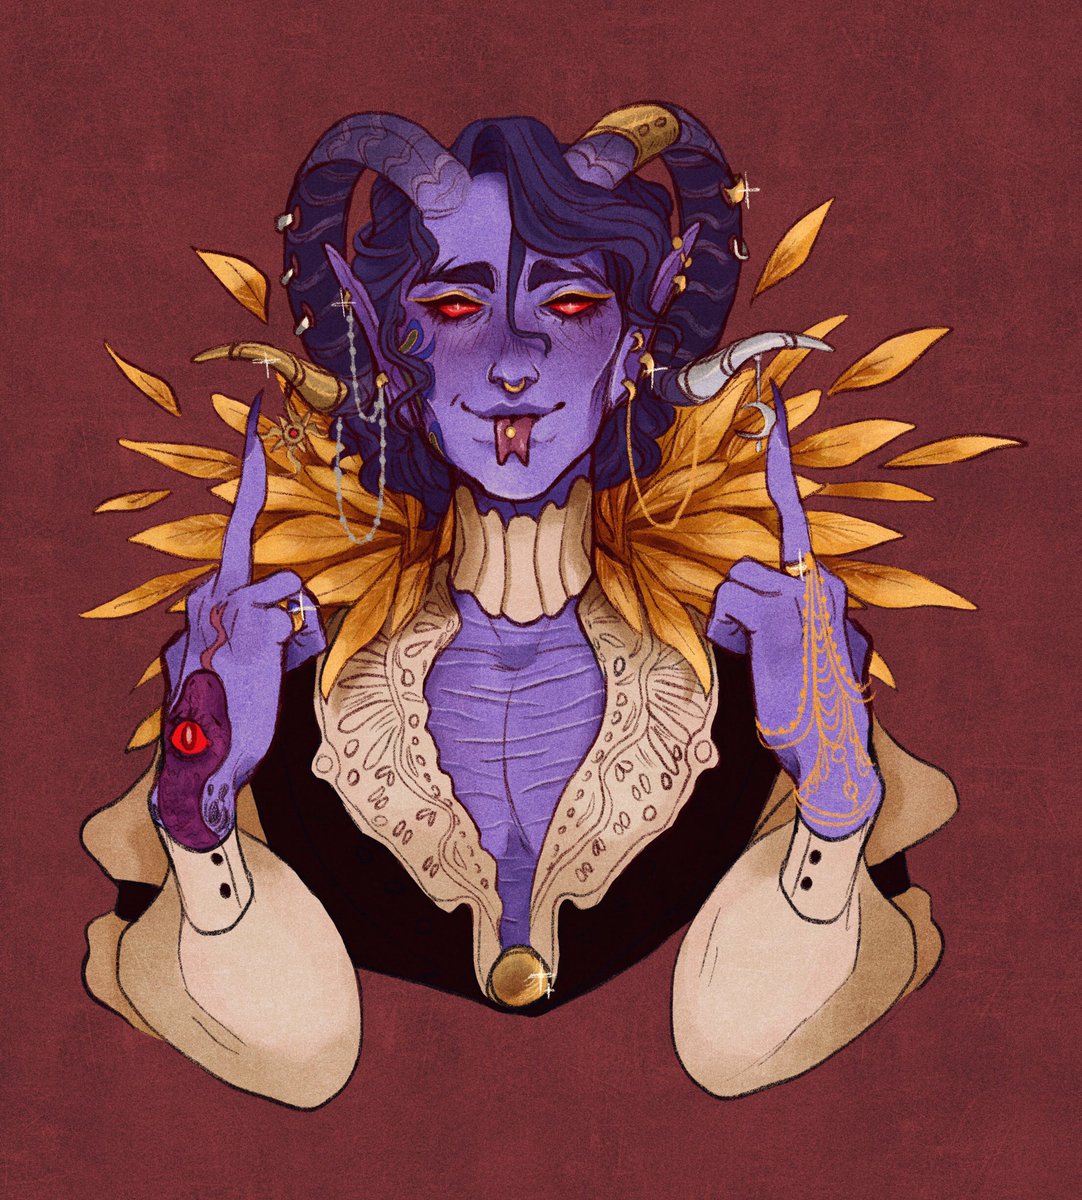 „Want me to love you in moderation
do I look moderate to you?“

#criticalrolefanart
#mollymauktealeaf